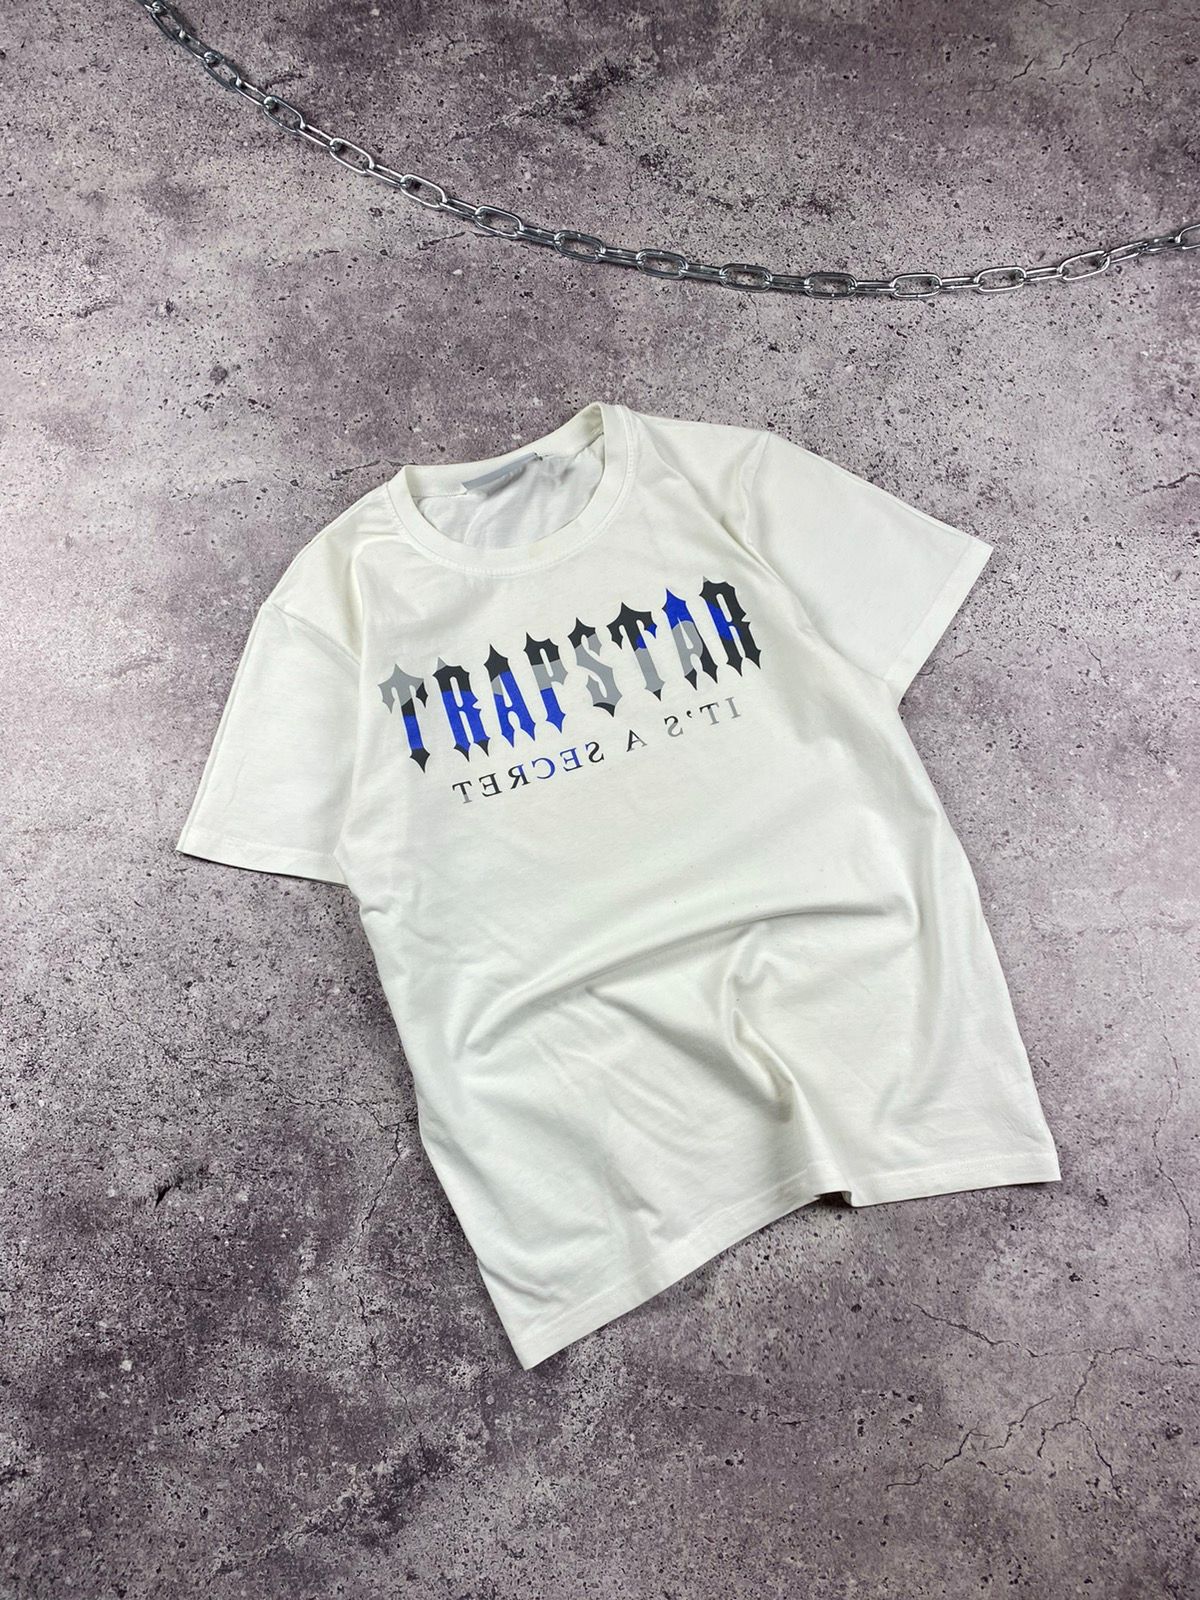 Pre-owned Trapstar London It's A Secret White Tee